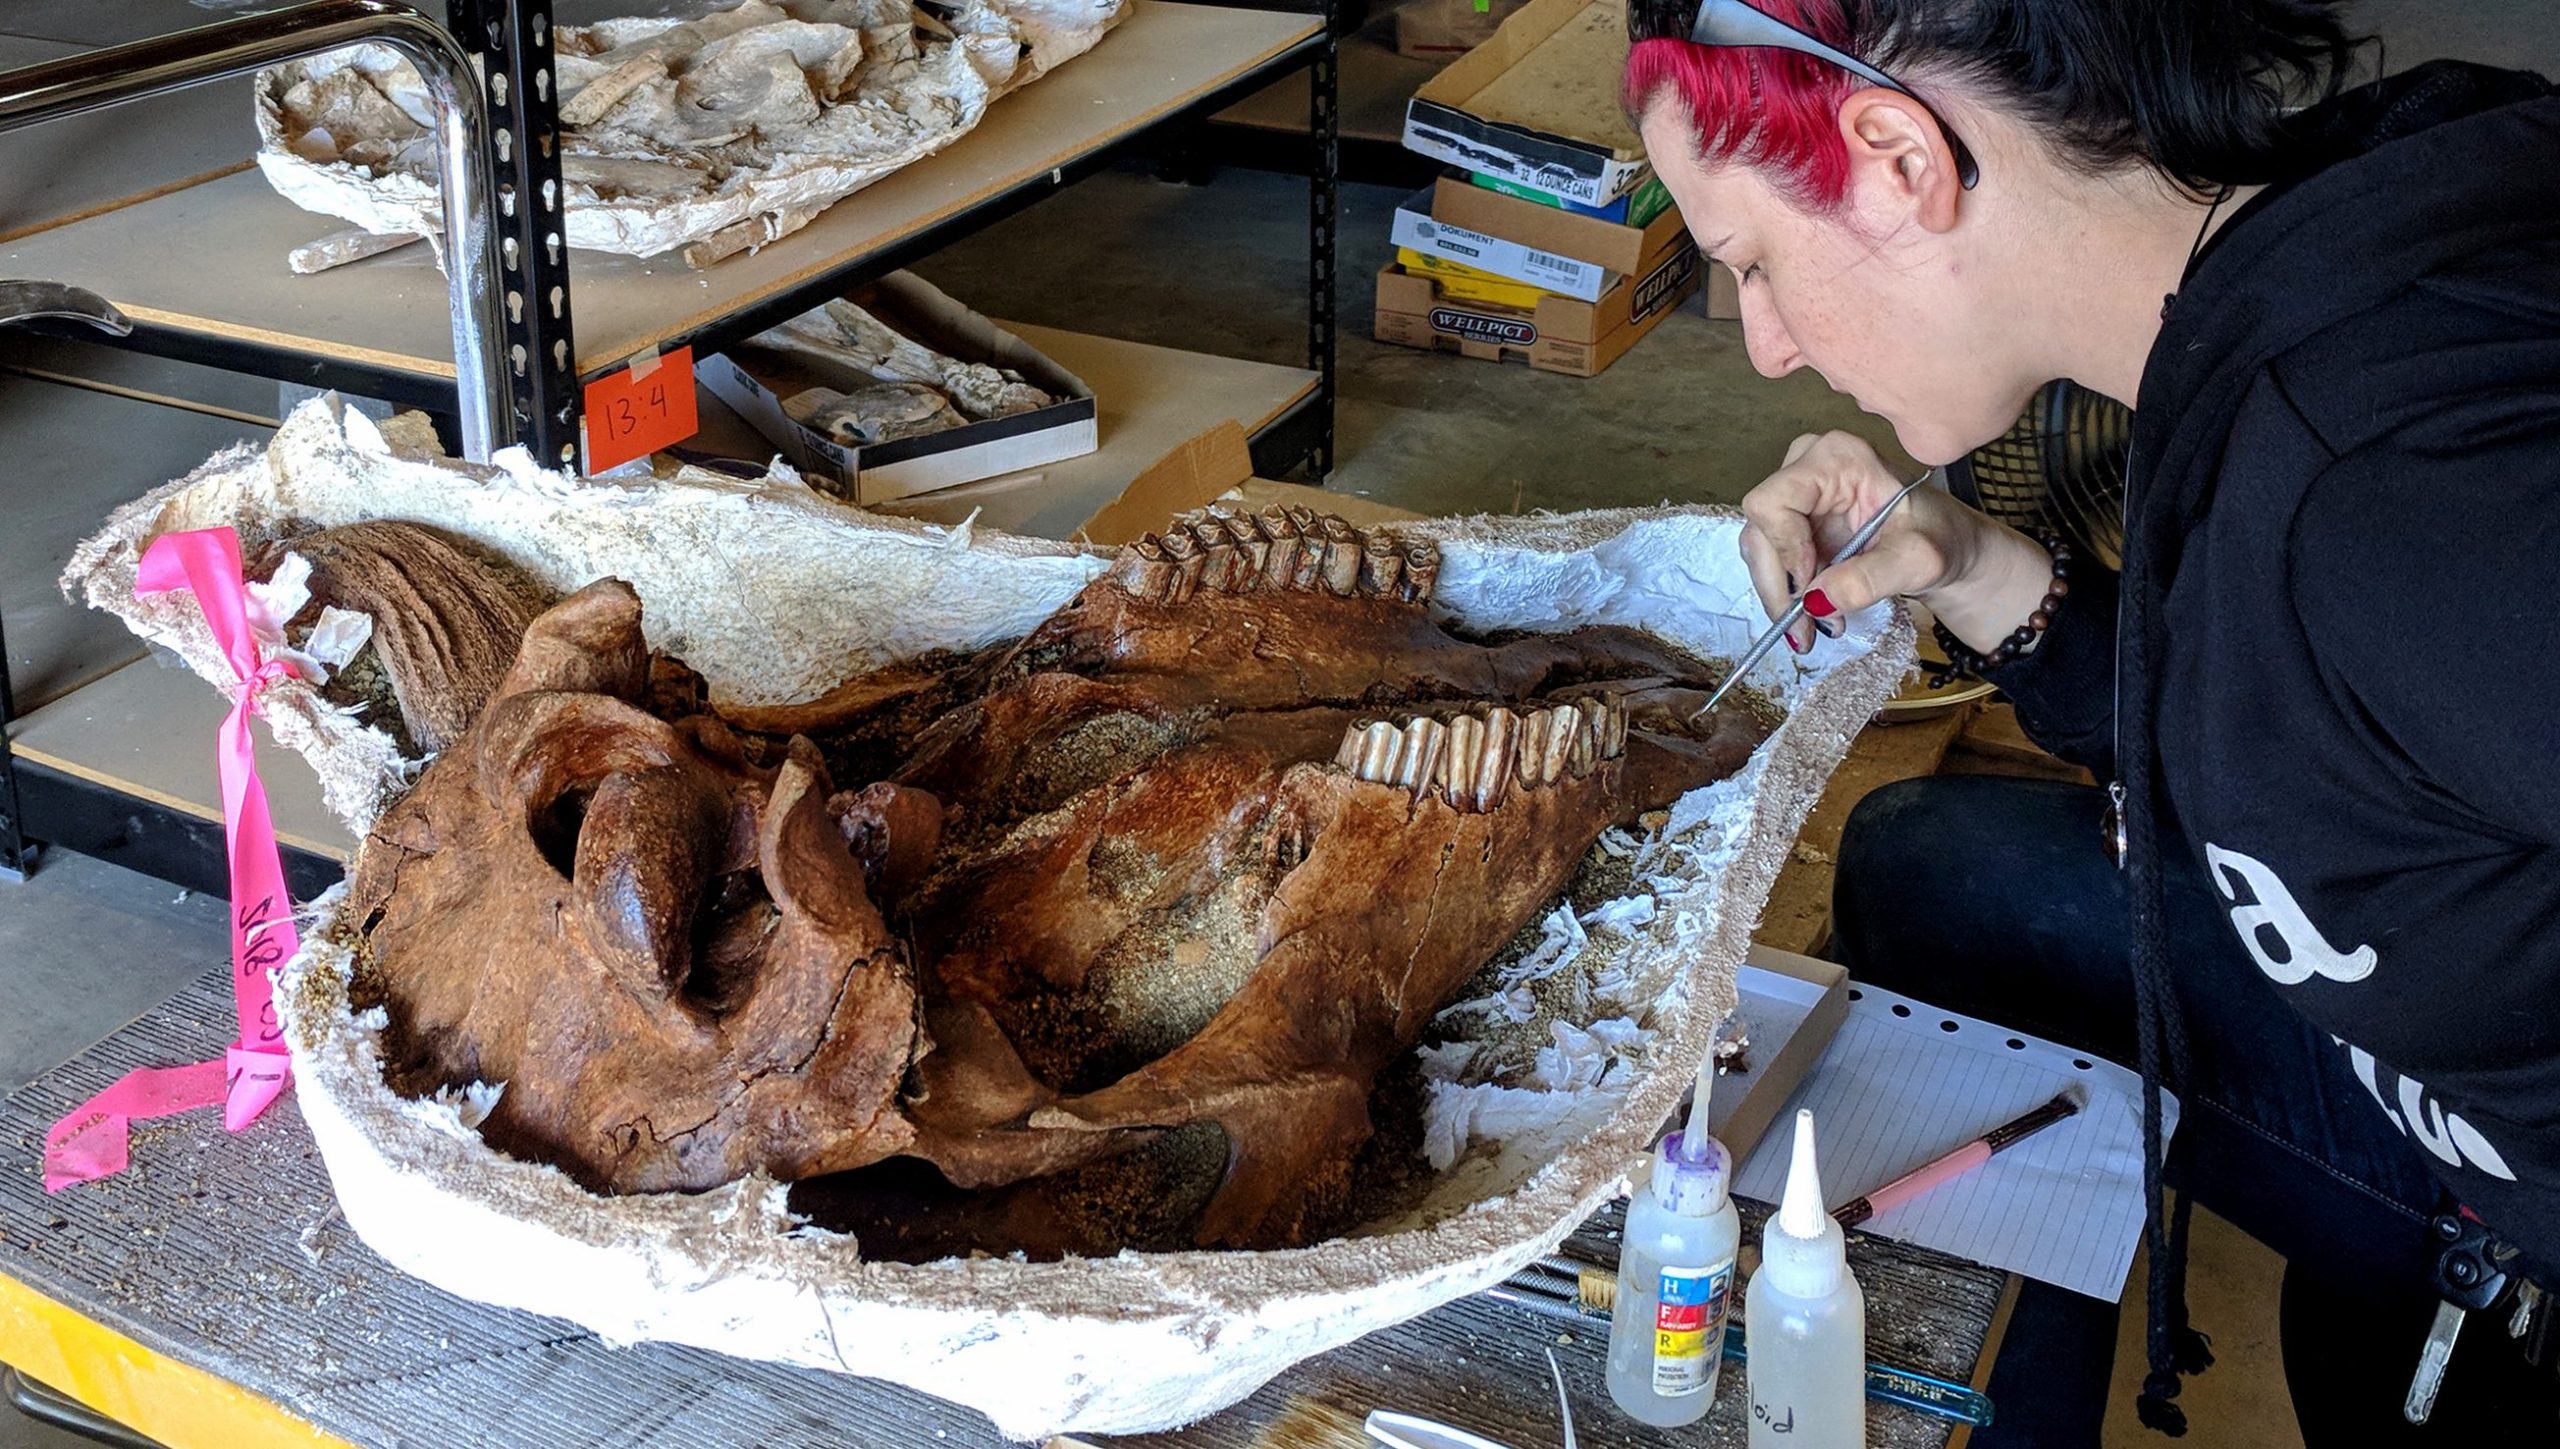 An archeologist examining a found bison skull.